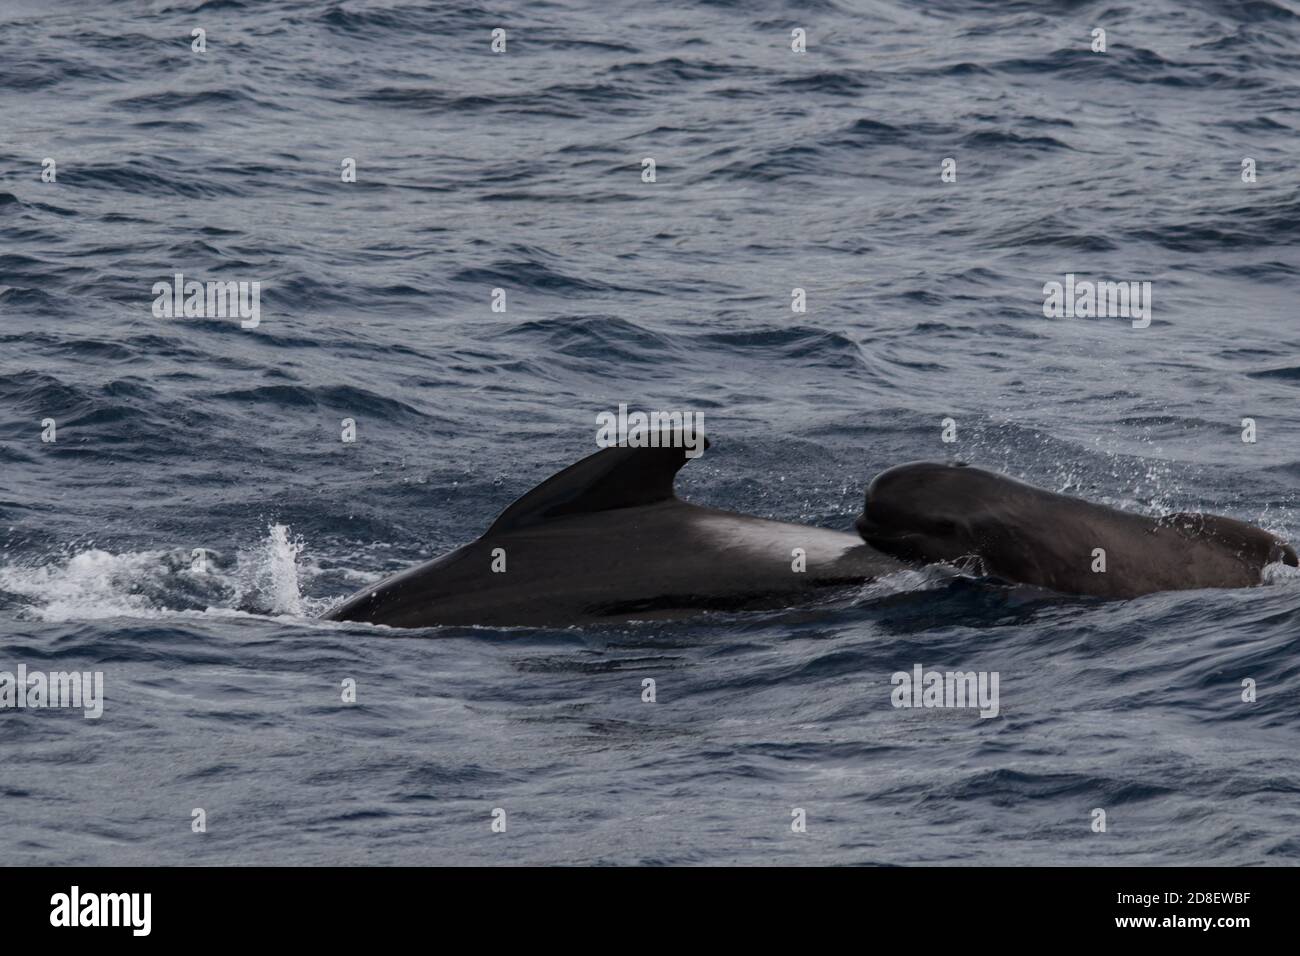 The Long-finned Pilot Whale (Globicephala melas) is a large species of oceanic dolphin. This image is of an adult and a juvenile. Stock Photo